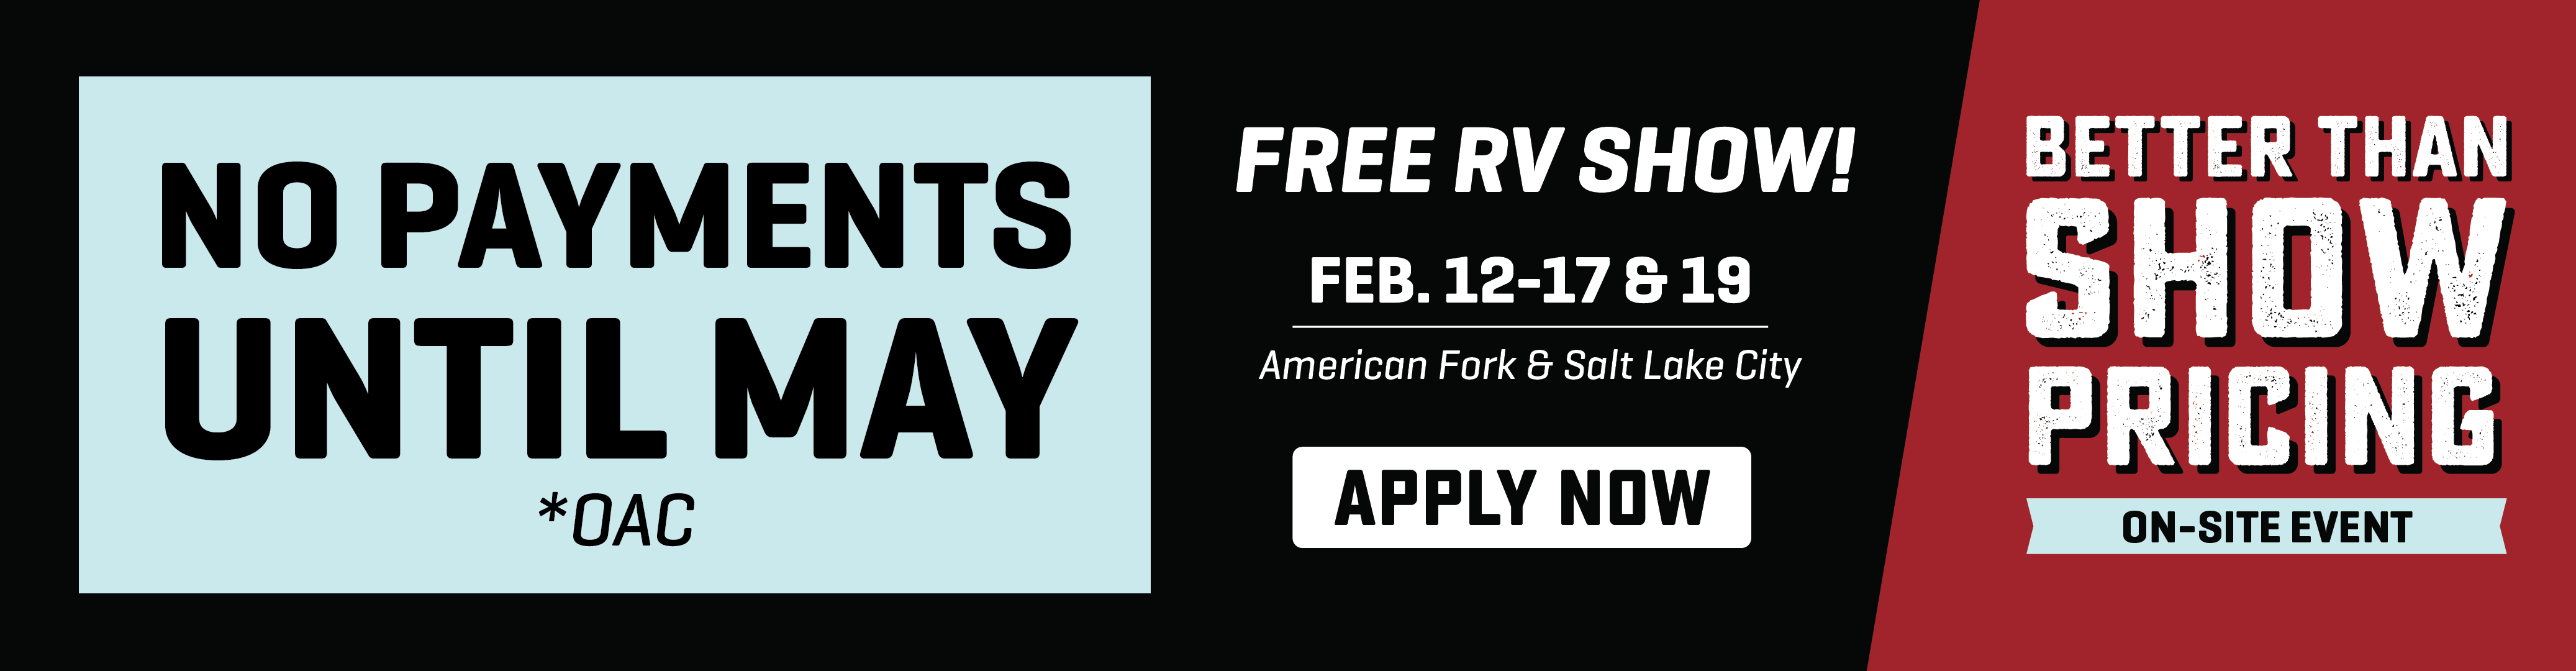 Zero Payments Until May OAC - Better Than Show Pricing On-Site Event - Feb. 12-17 & 19 - Bish's RV of American Fork, Utah and Salt Lake City, UT